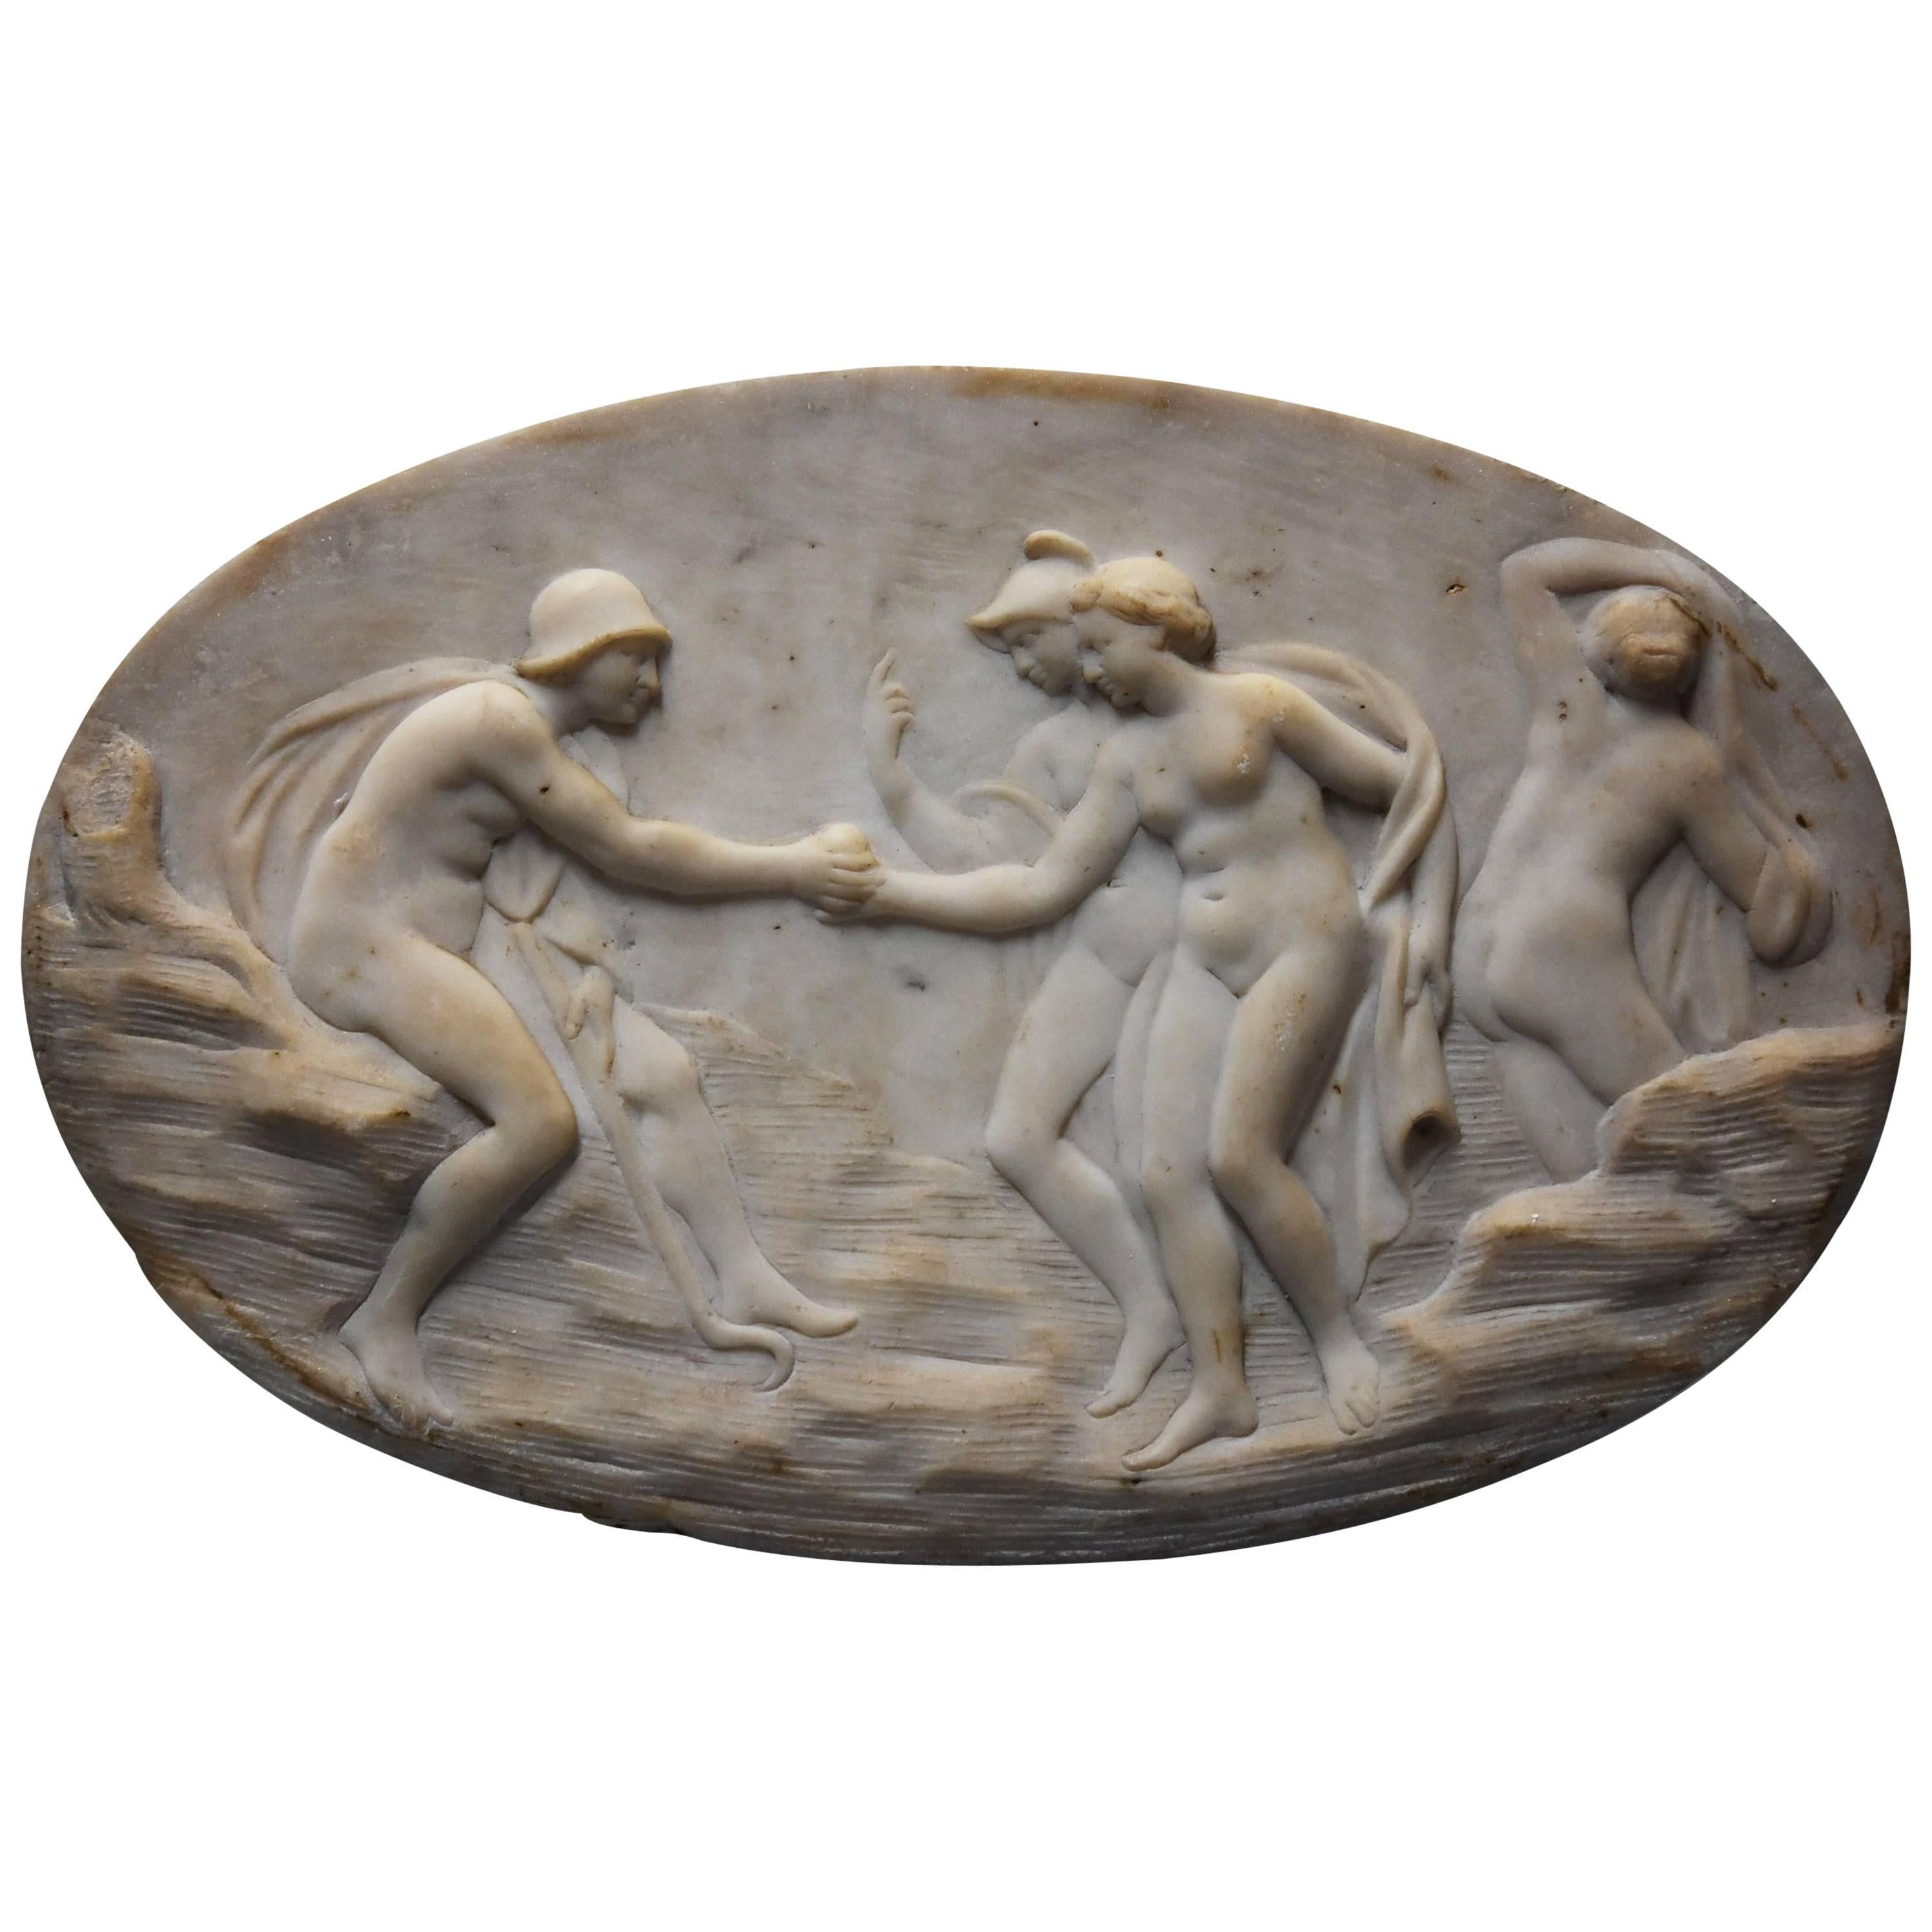 Marble Oval Plaque of a Classical Scene, Possibly ‘The Judgement of Paris'